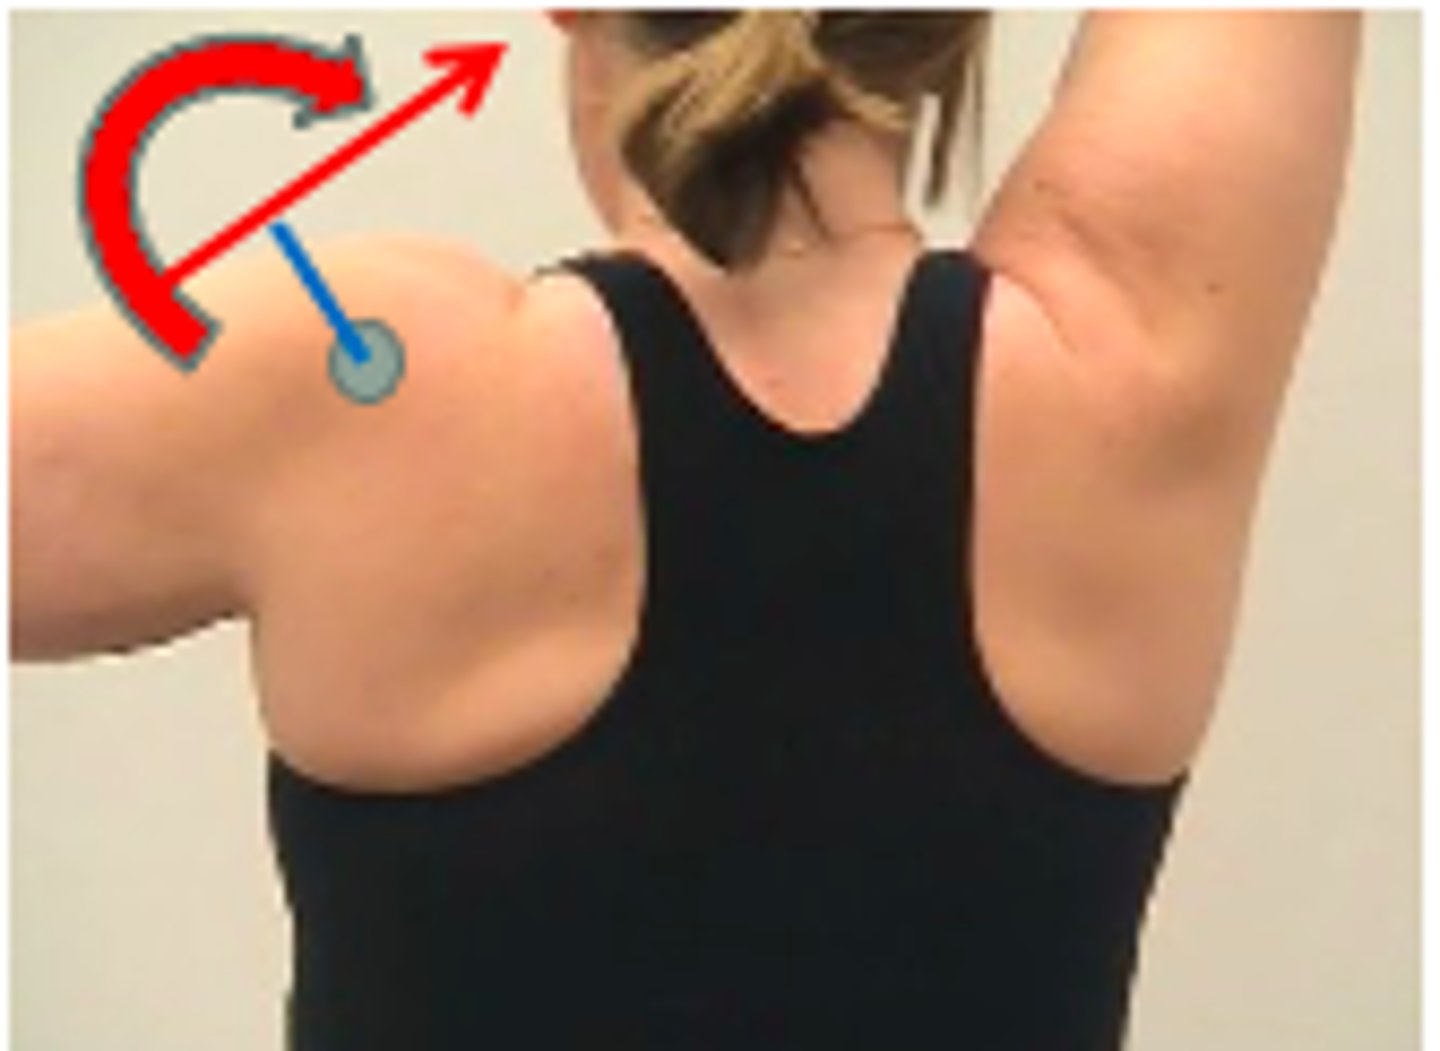 <p>General Abduction Shoulder Movement. <br><br>Blue circle = ?<br>Curved red arrow = ?<br>Linear red arrow = ?</p>